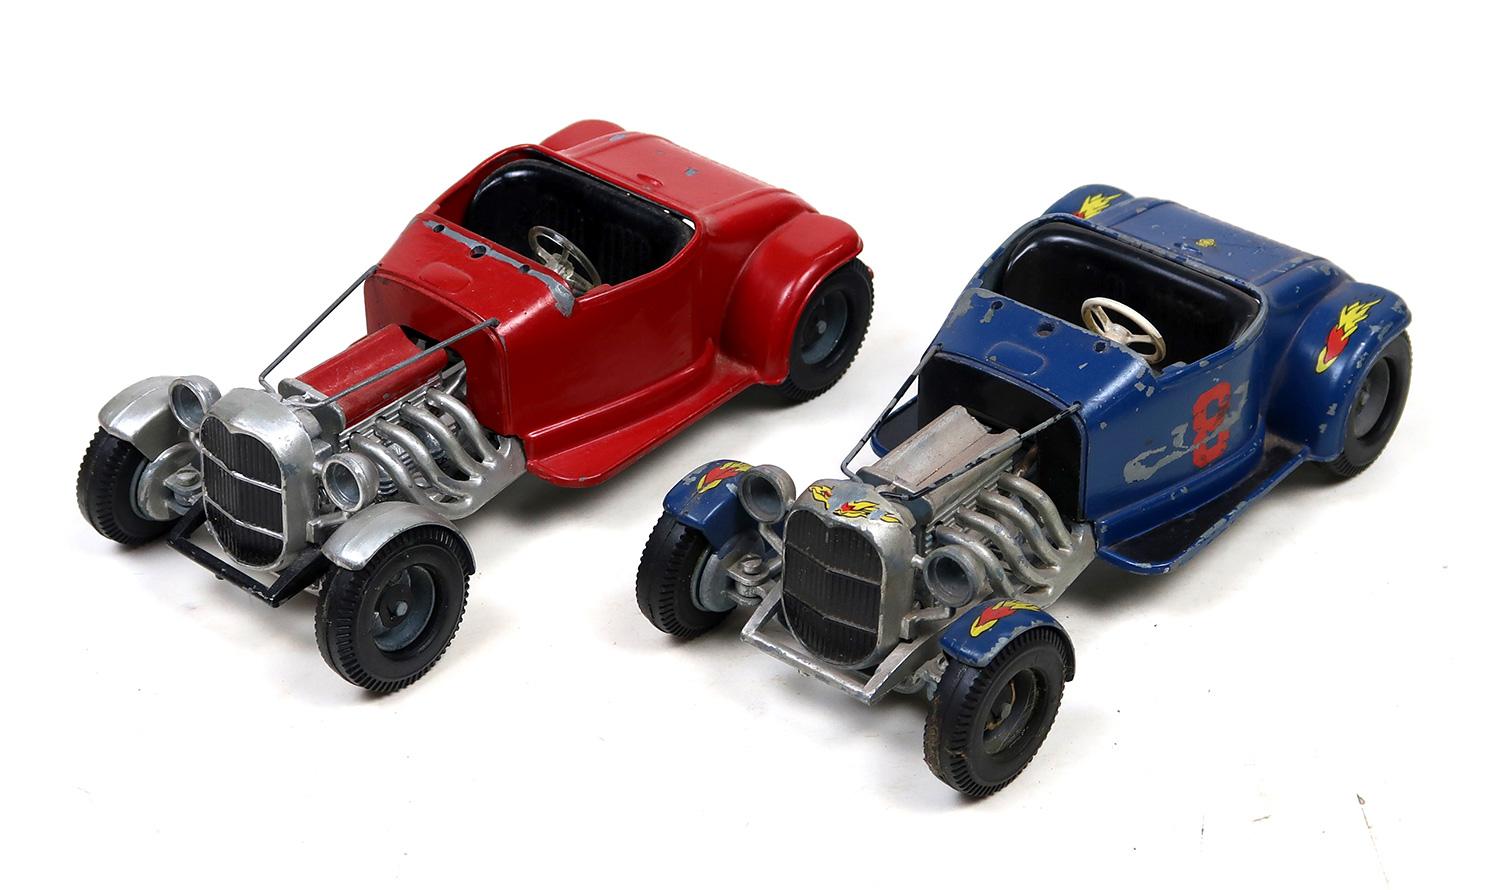 Toy Scale Models (4), Hubley (2) 1932 Ford Hot Rods, Road Tough, 1955 Thund